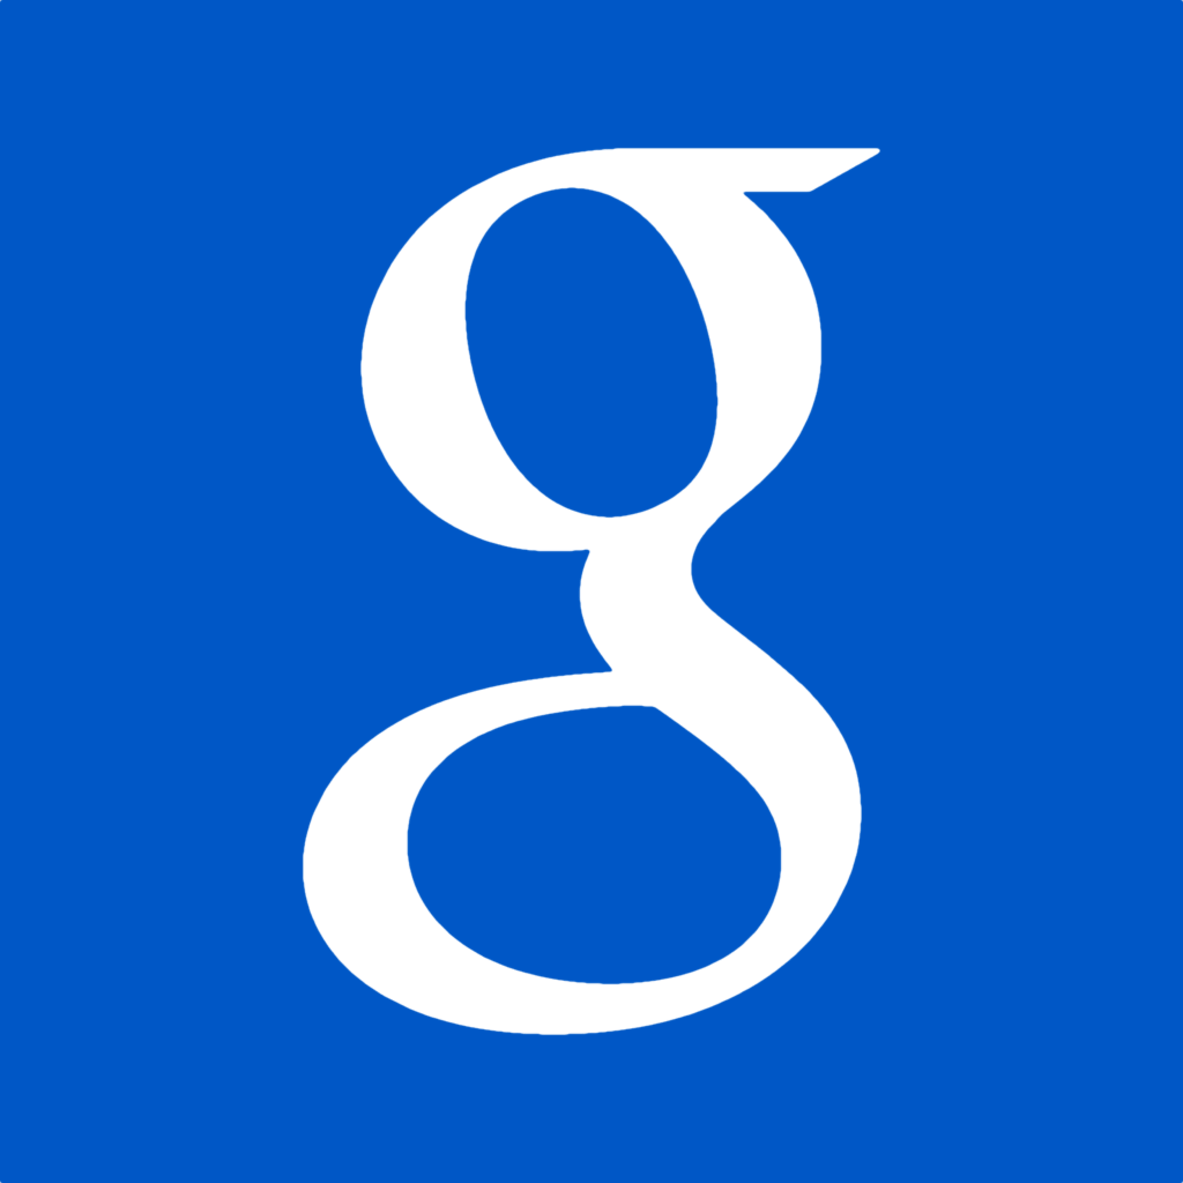 Google G Logo - Yes, Google has a new logo – but why? | The News Minute